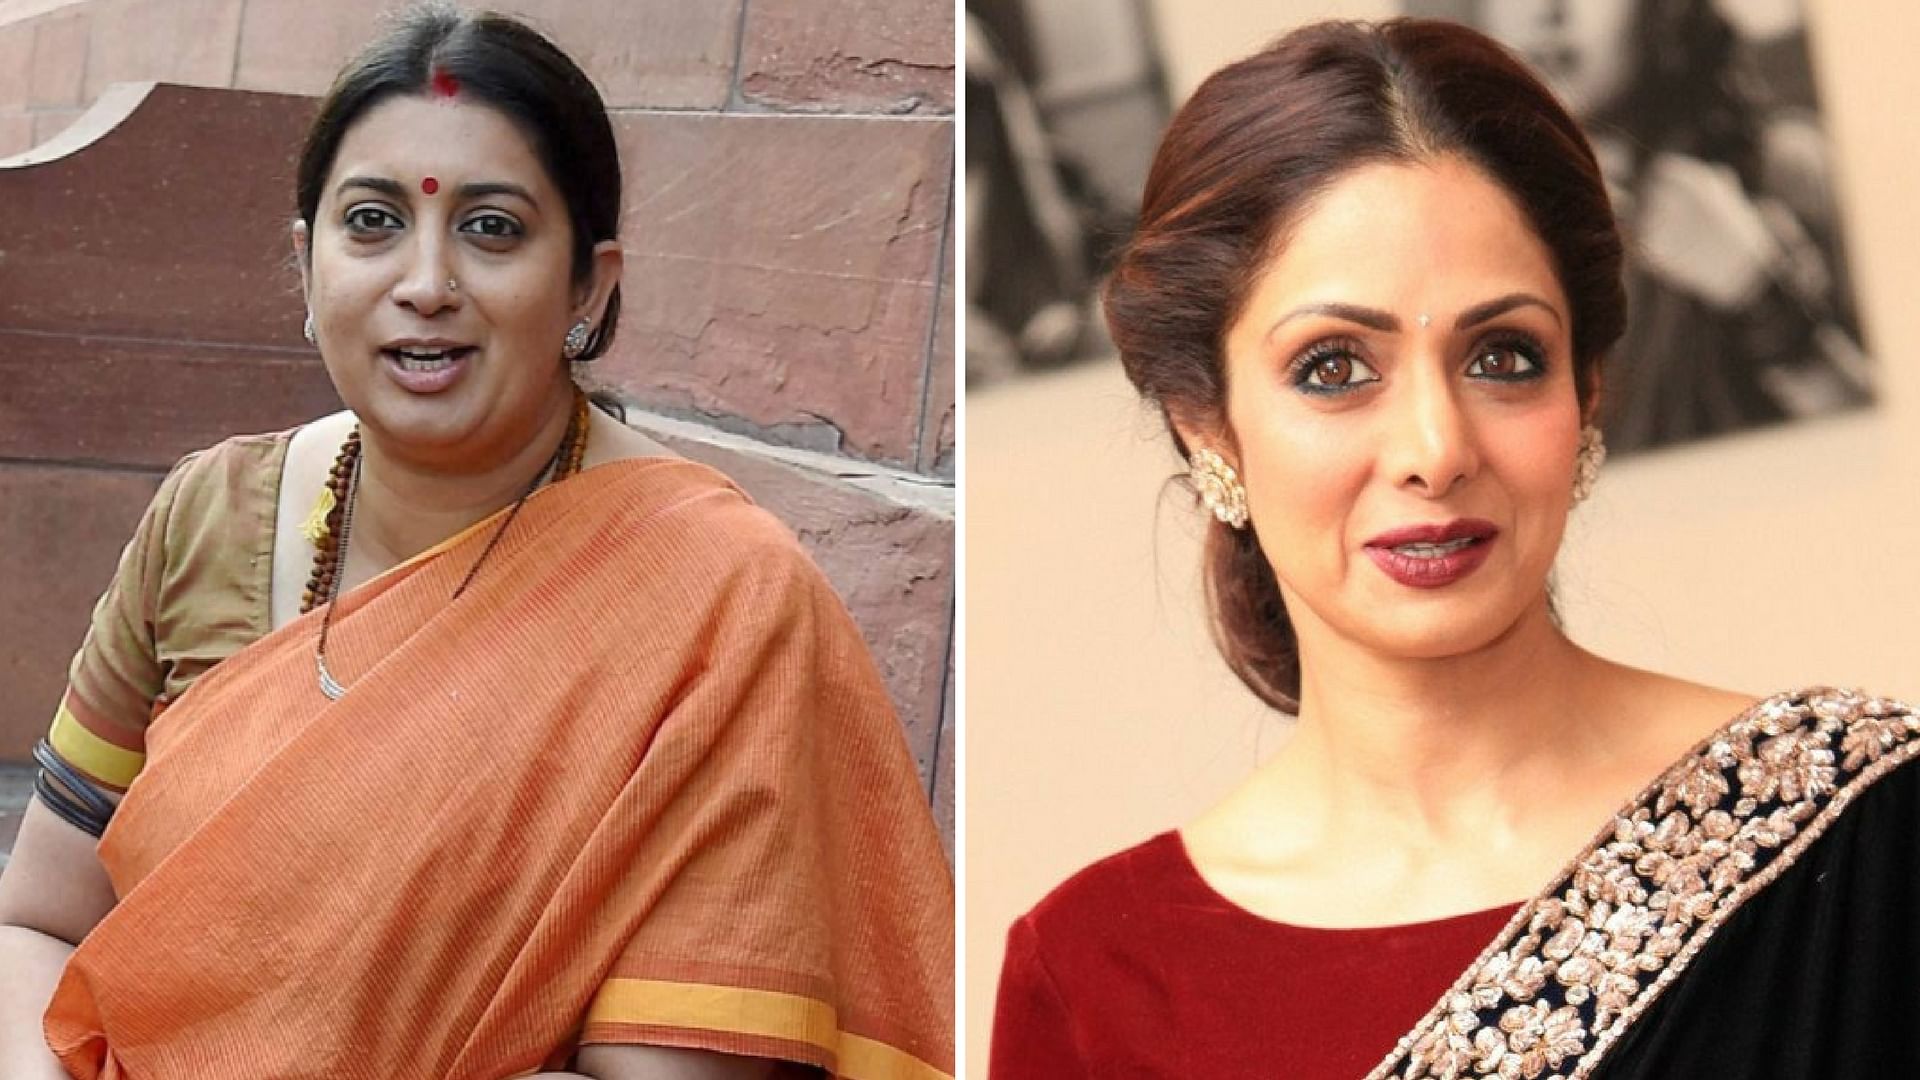 Smriti Irani described Sridevi as the first female superstar of the Indian film industry, who shouldered many ‘90s blockbusters alone.